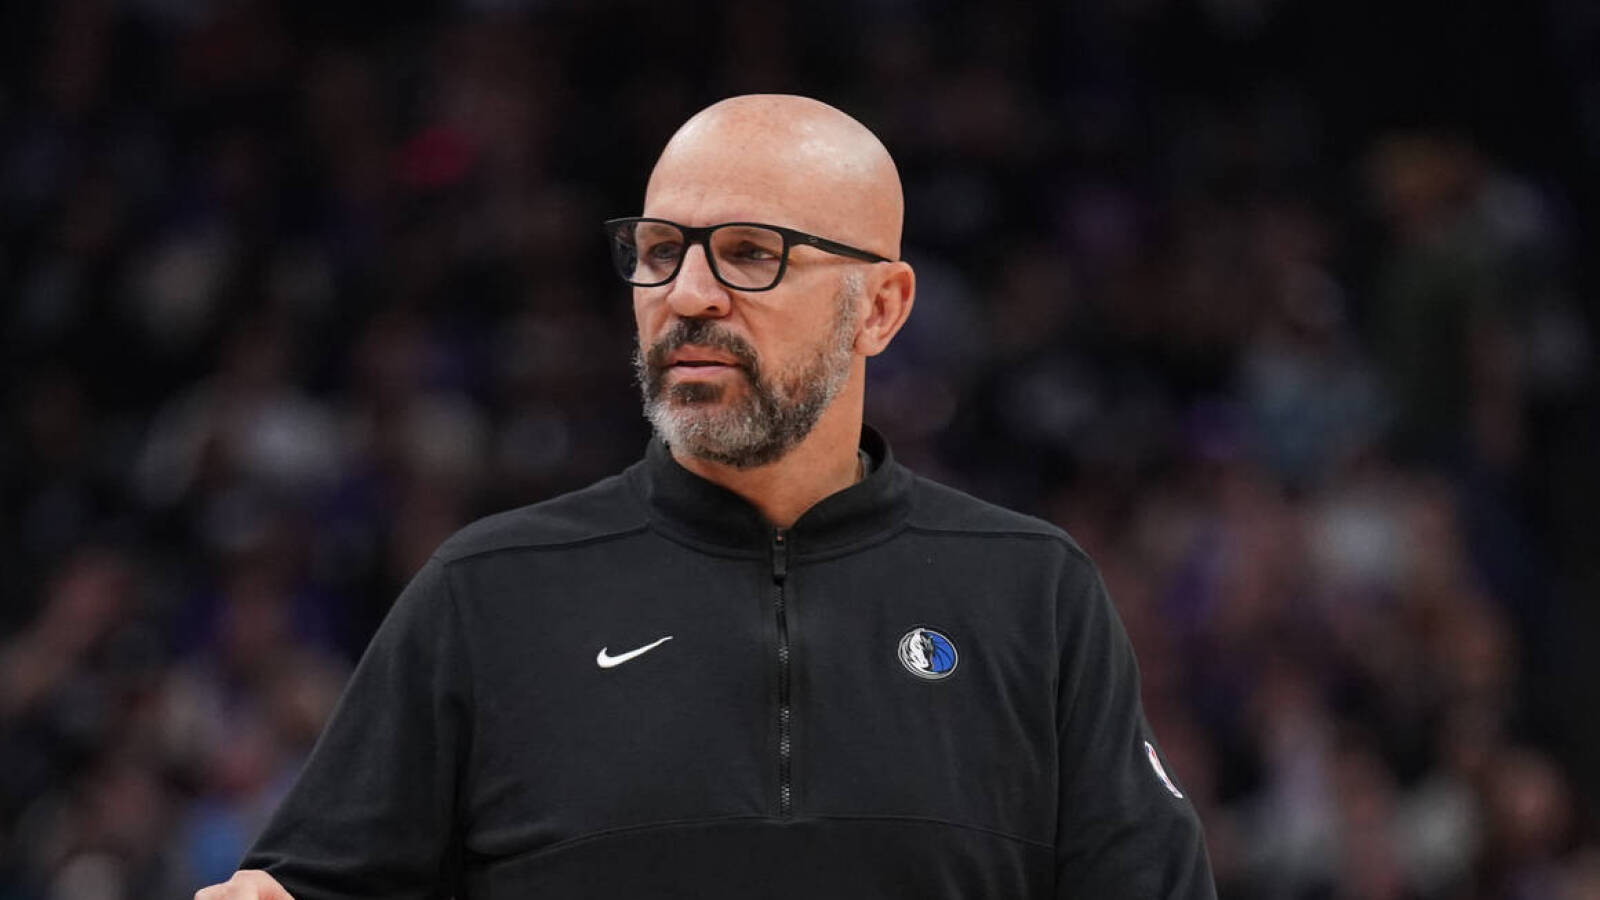 Lakers coaching target likely to sign extension with current team